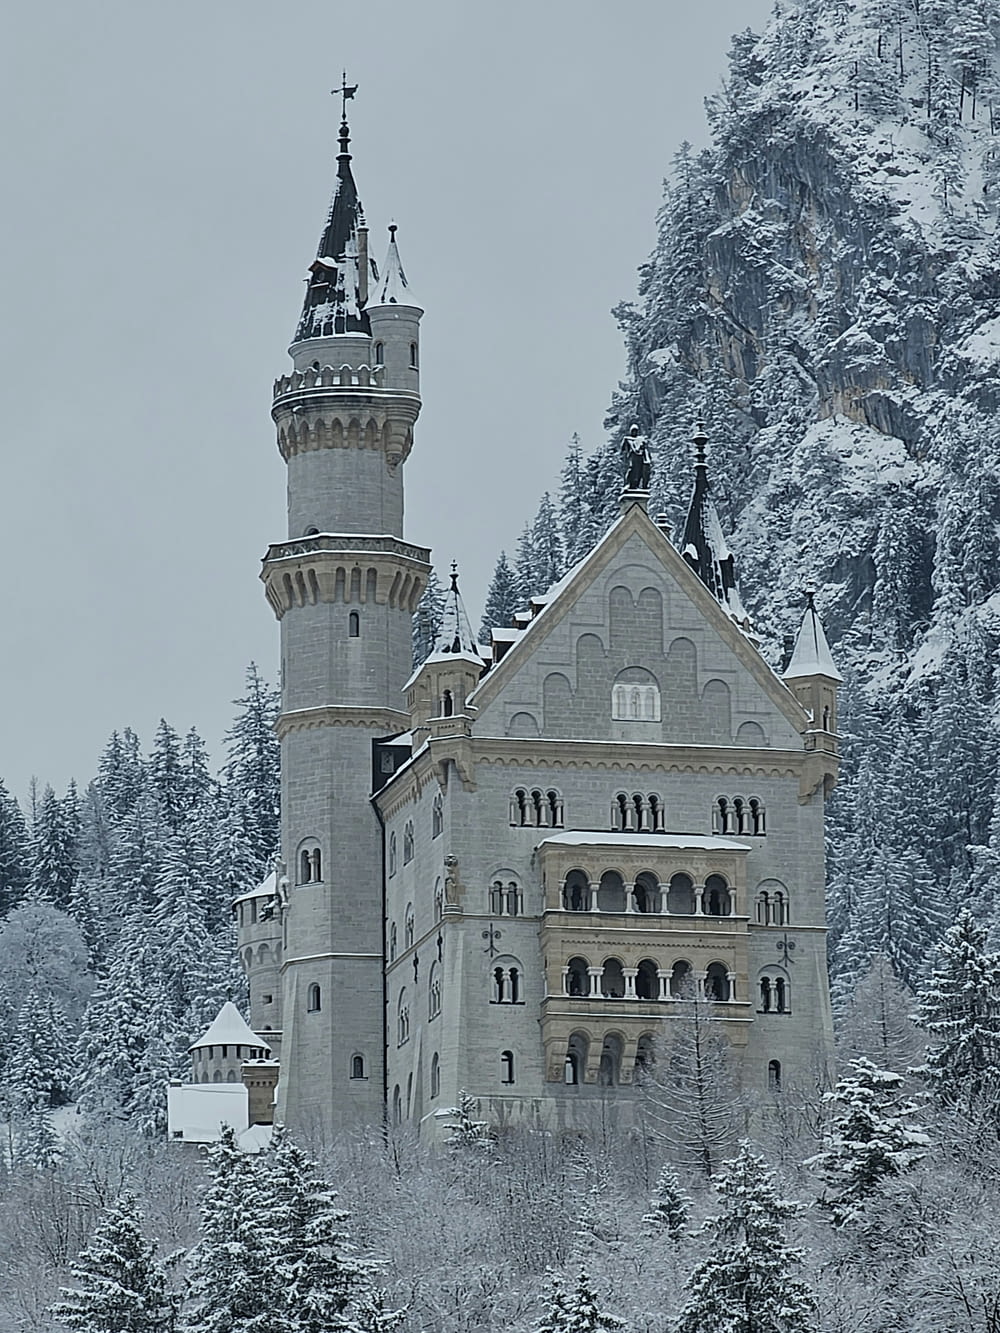 a large castle with a clock on the top of it